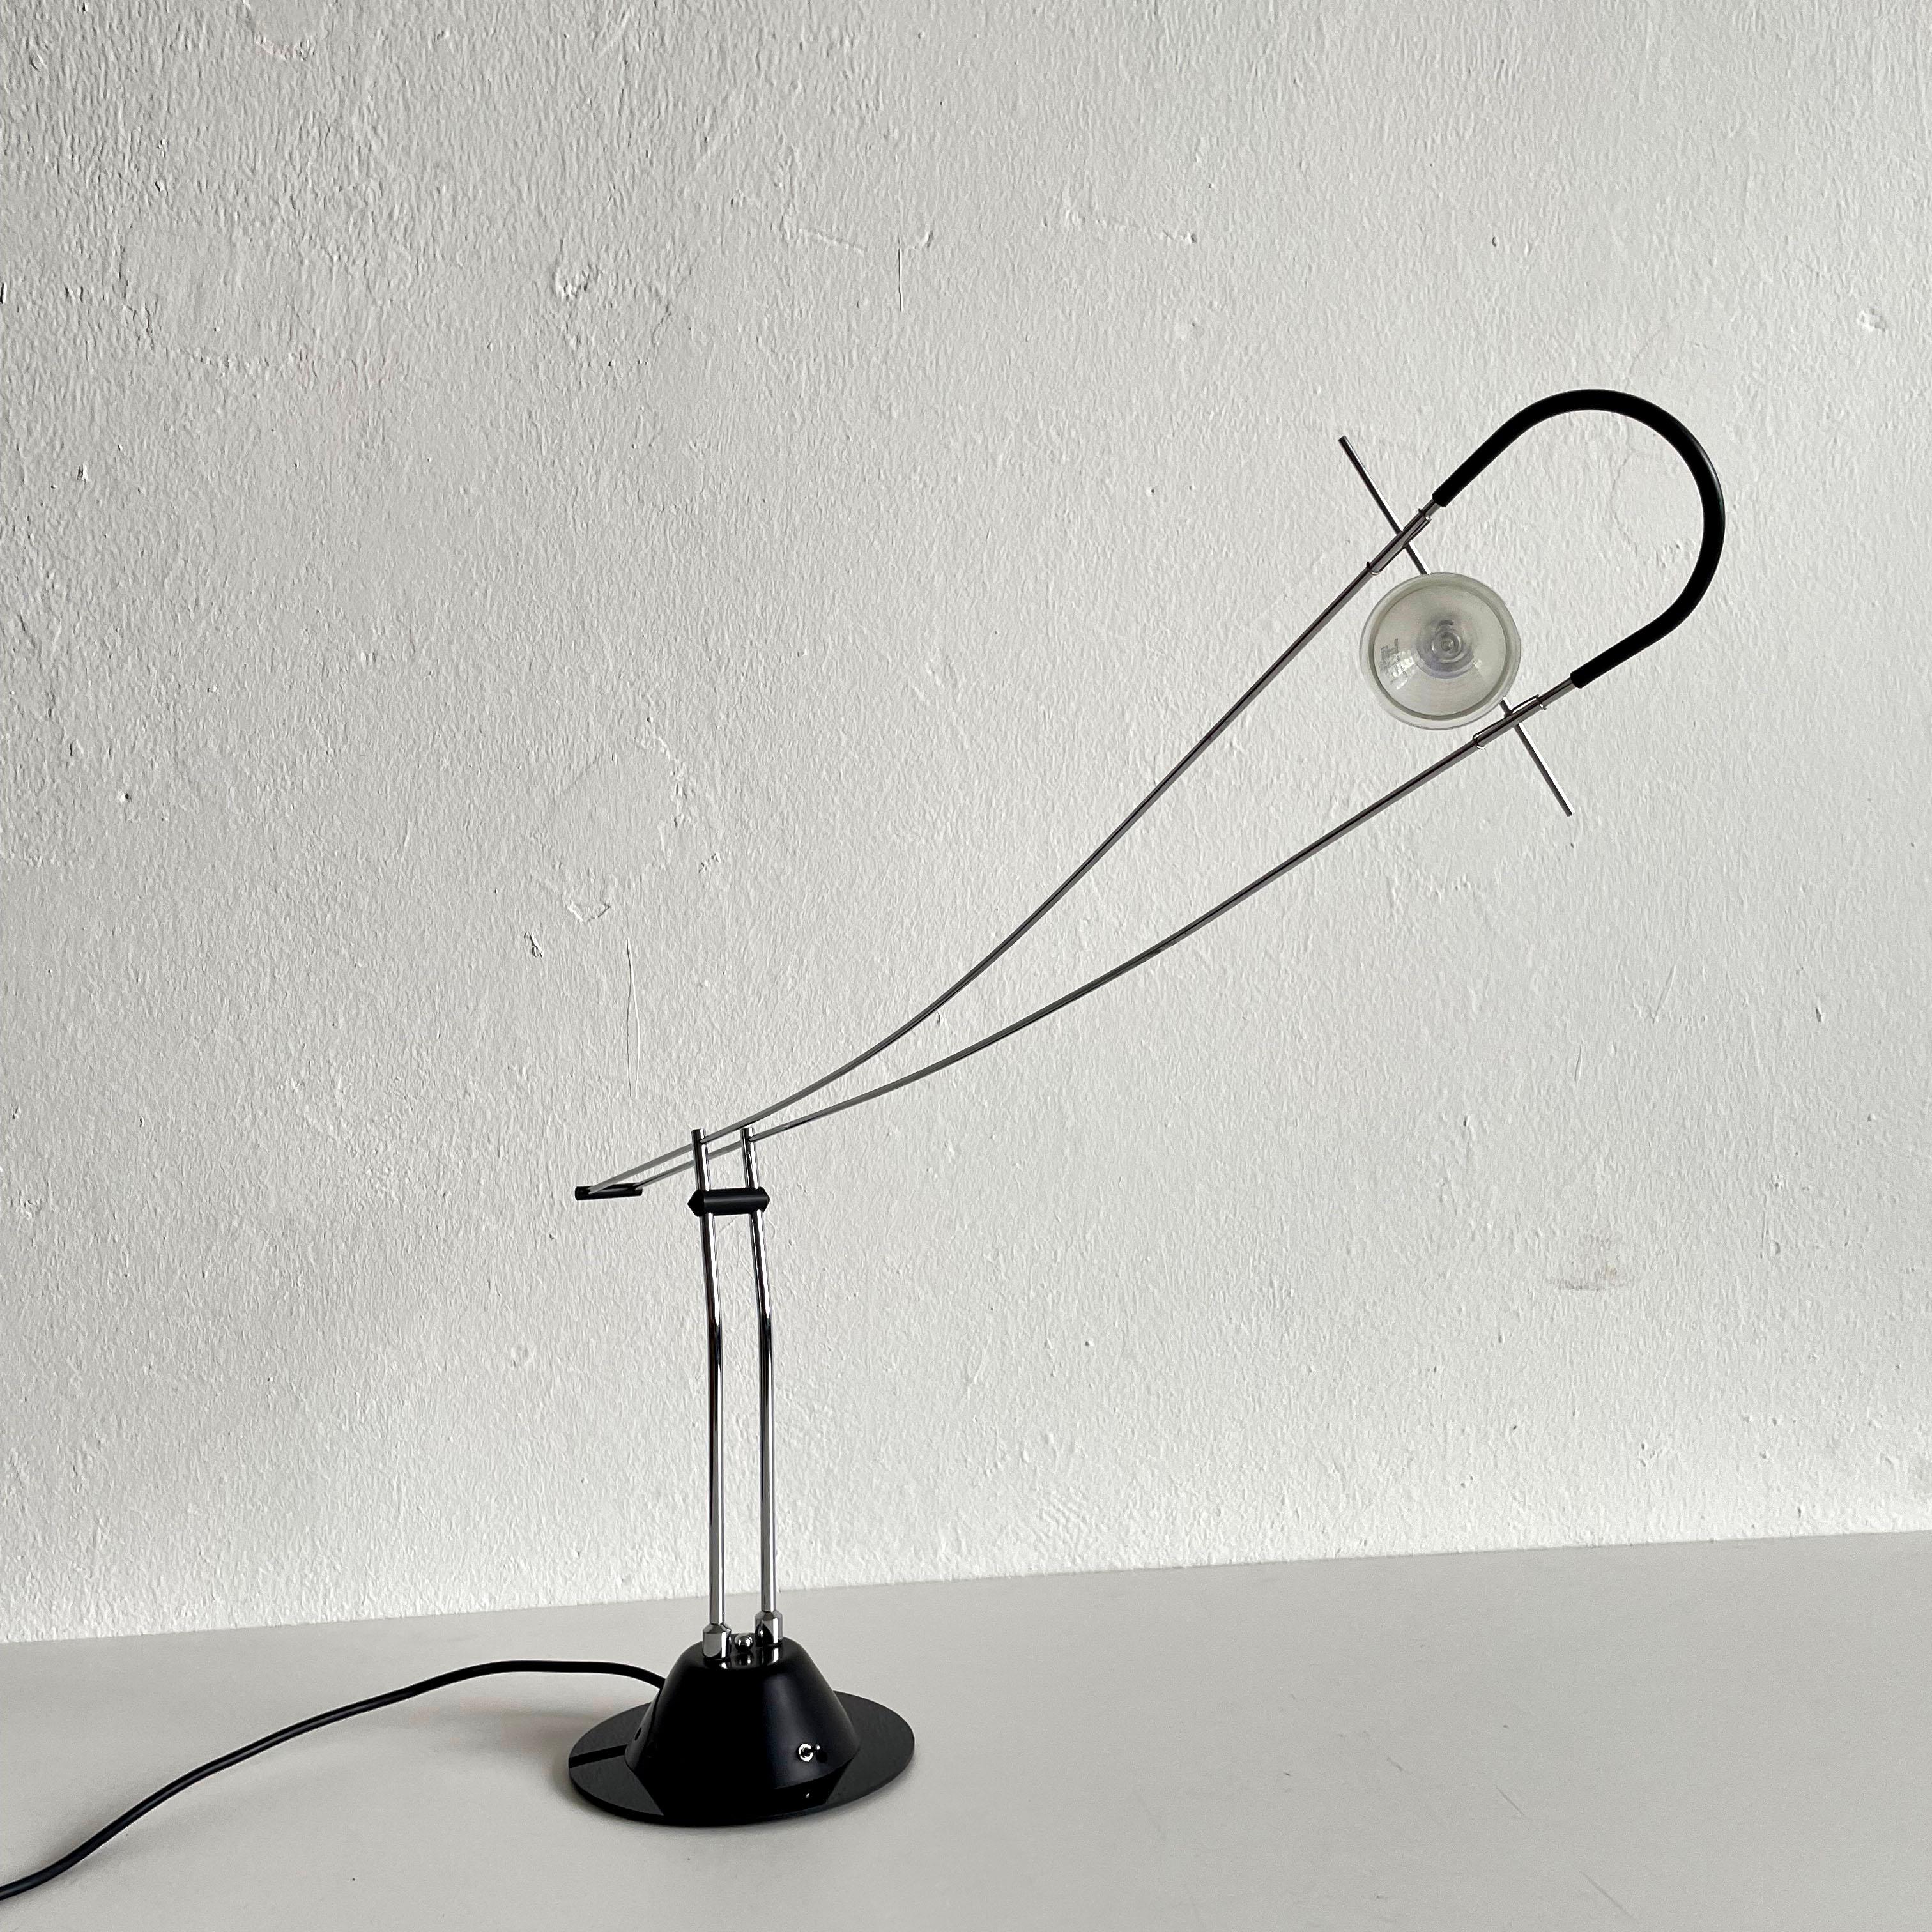 Vintage halogen desk lamp in great original condition.

Elegant Minimalist design from the 1980s - 1990s, adjustable light intensity with the on/off switch, adjustable direction of the spot light

In perfect working order.

A spare bulb will